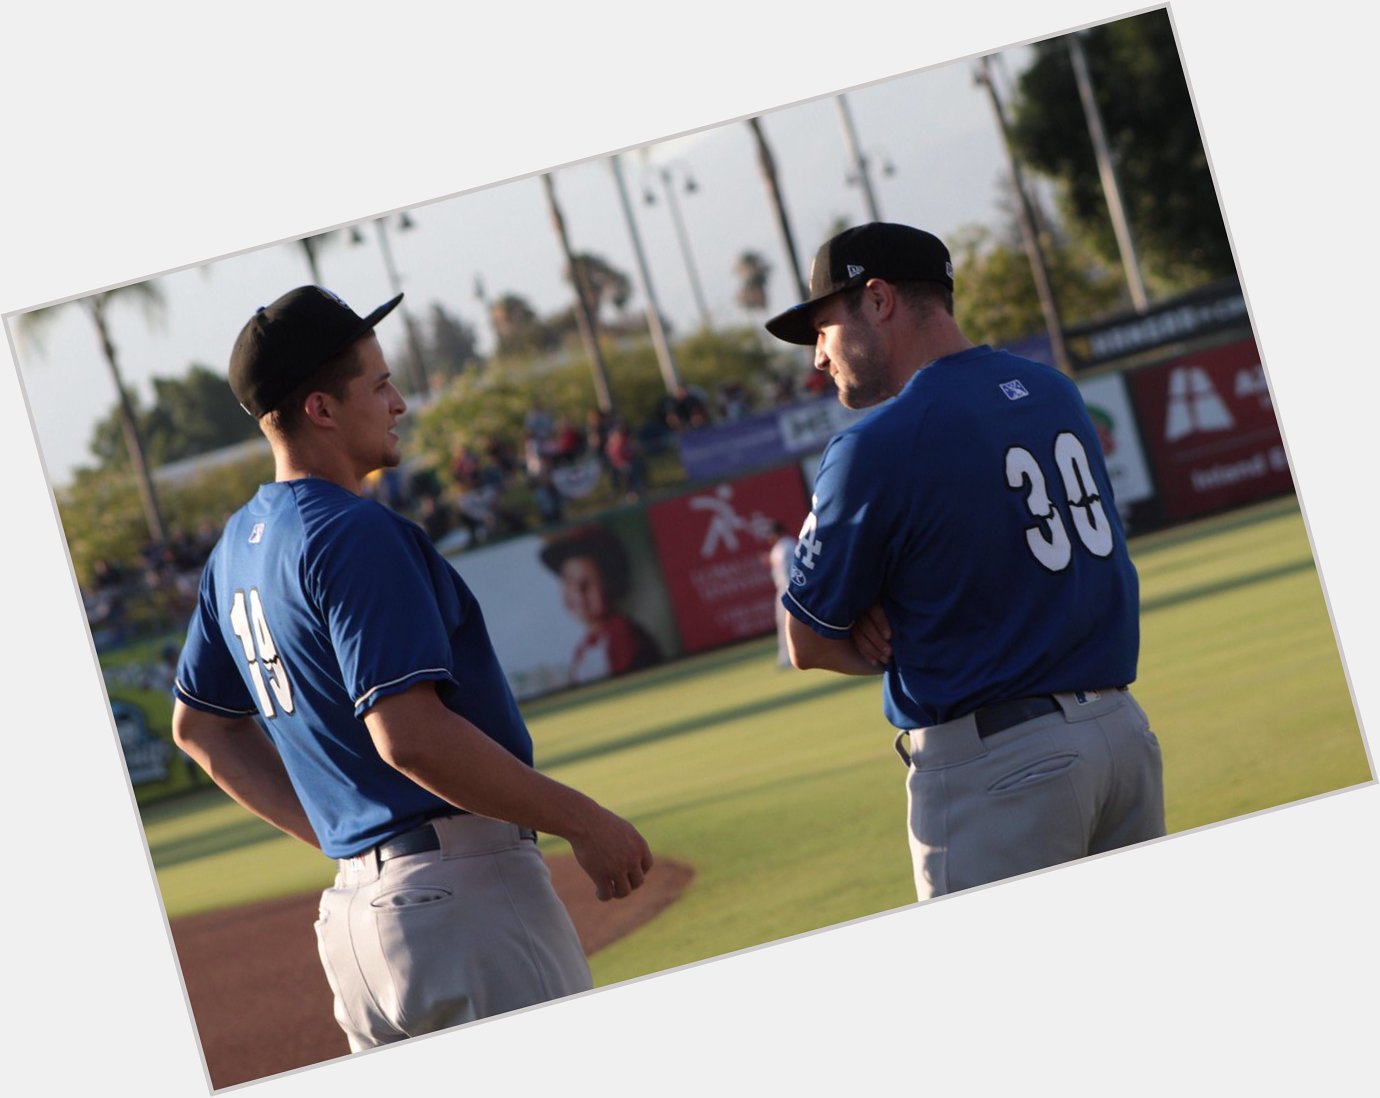 Lots to celebrate today for these two! 

Happy Birthday, AJ Pollock and Happy Wedding Day to Corey Seager! x2 